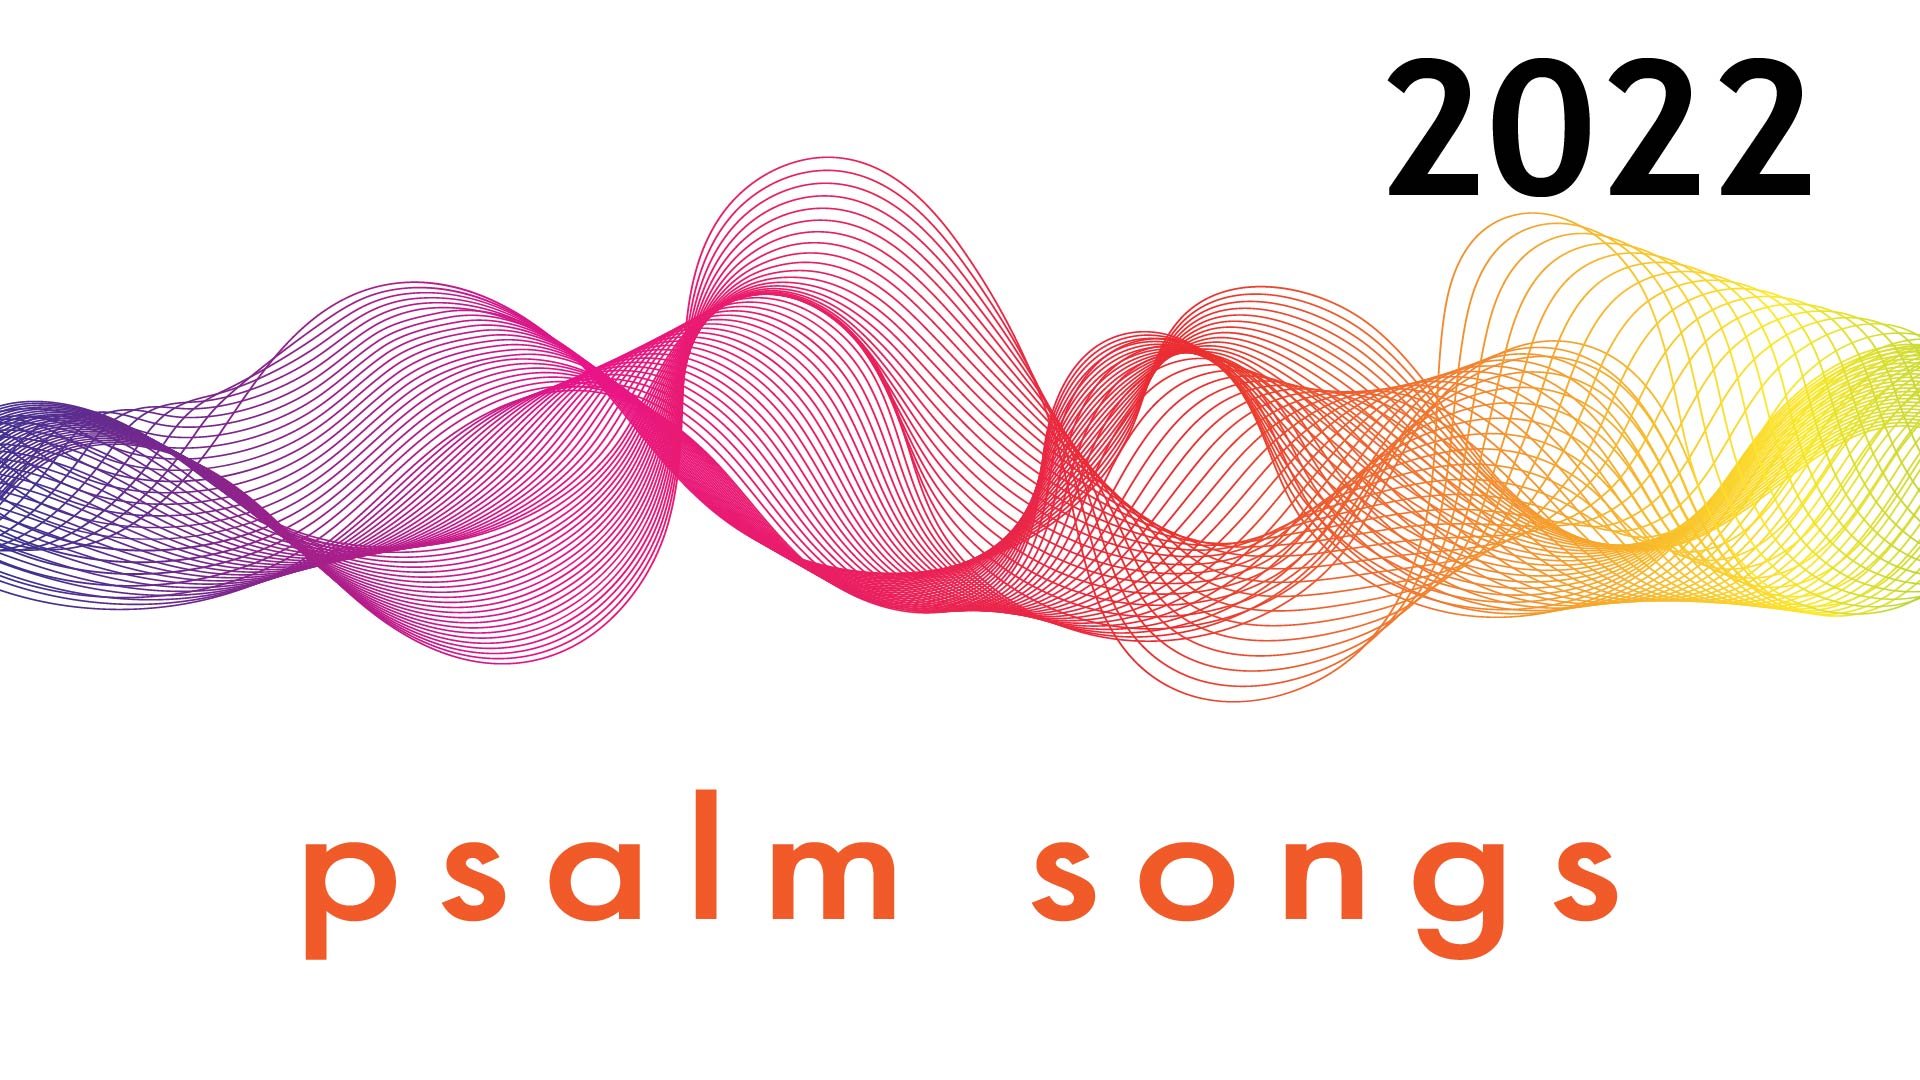 A colorful audio waveform fills the picture. 'Psalm Songs' is written below it.